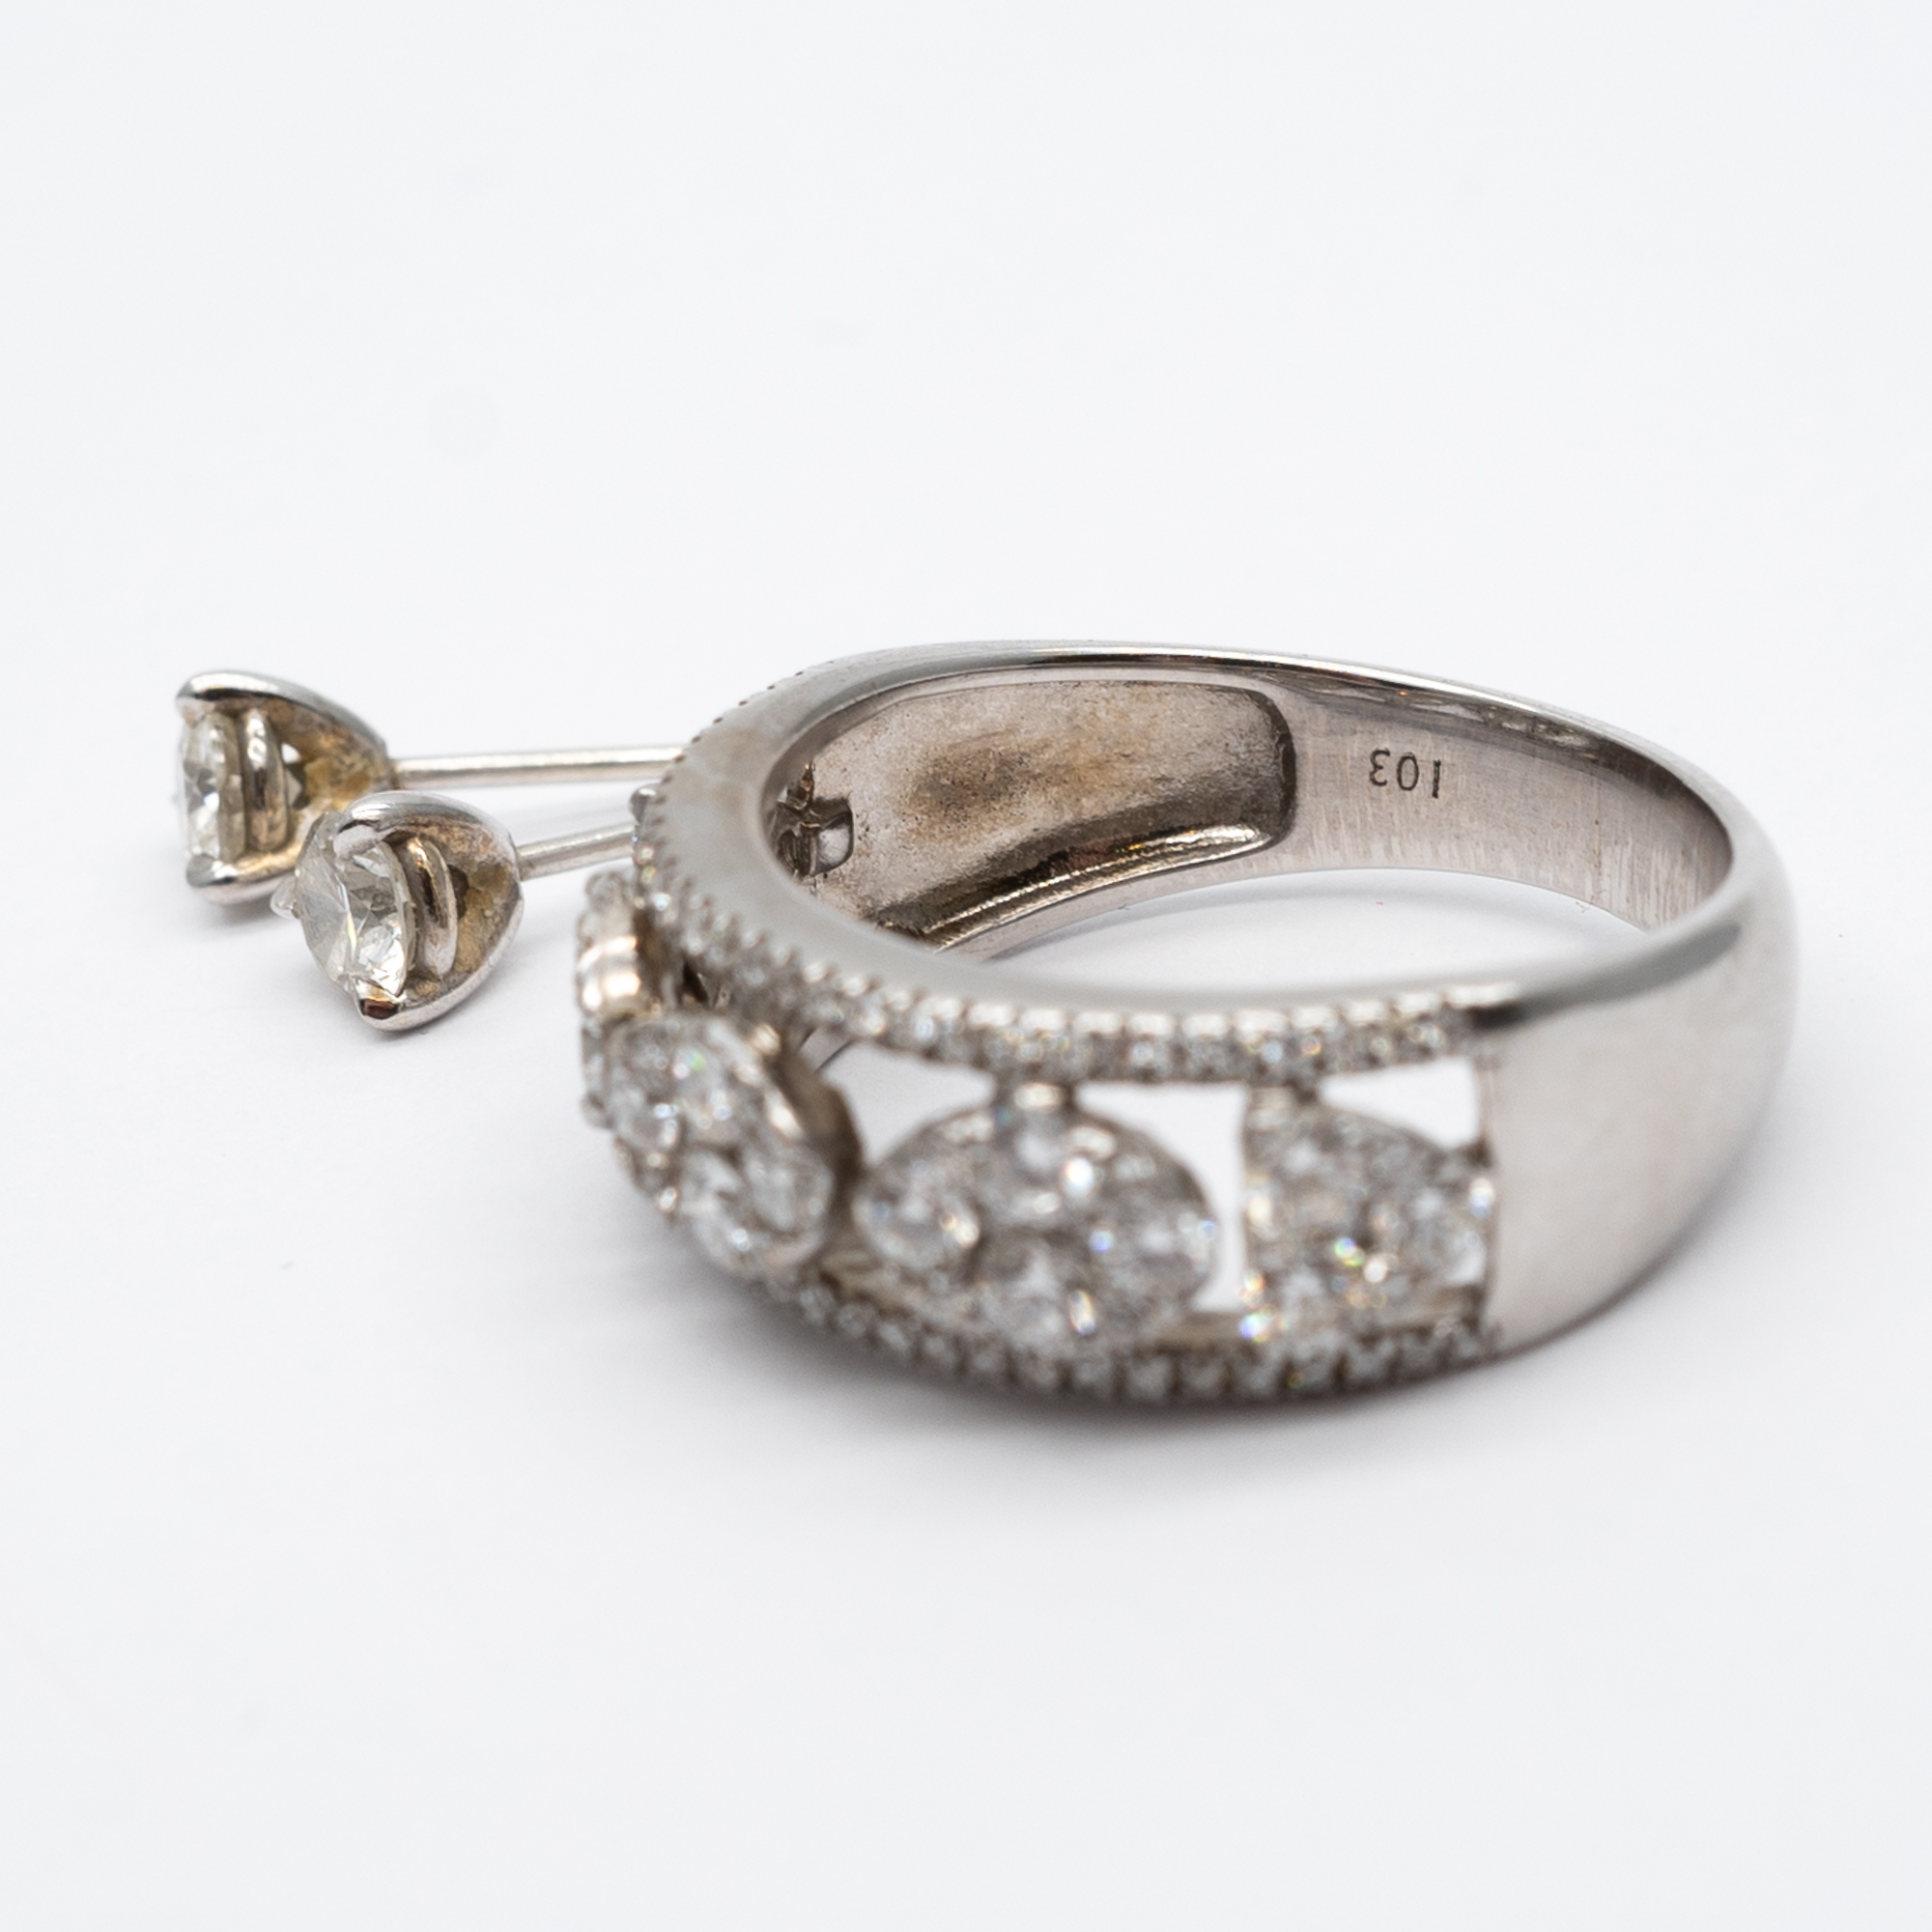 An 18ct white gold diamond dress ring and diamond stud earrings - Image 5 of 7